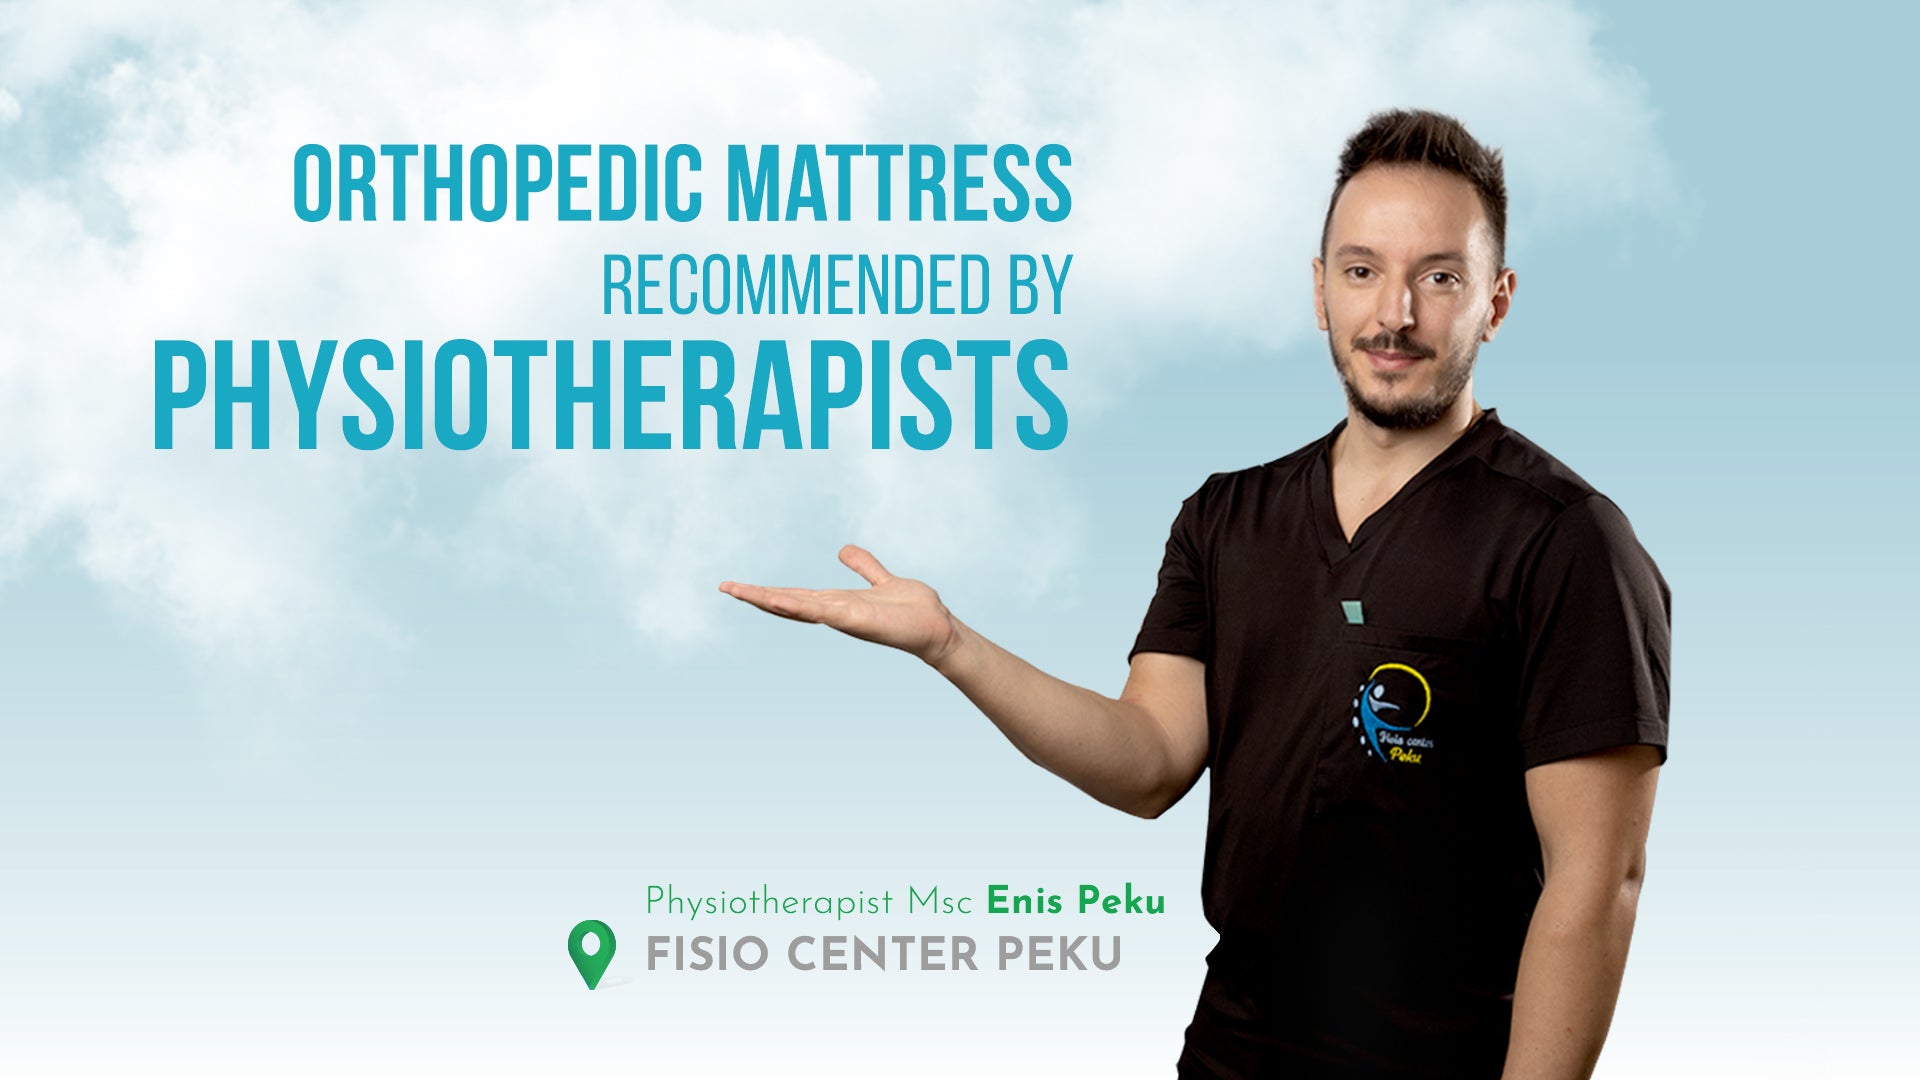 Orthopedic mattres recommended by physiotherapists